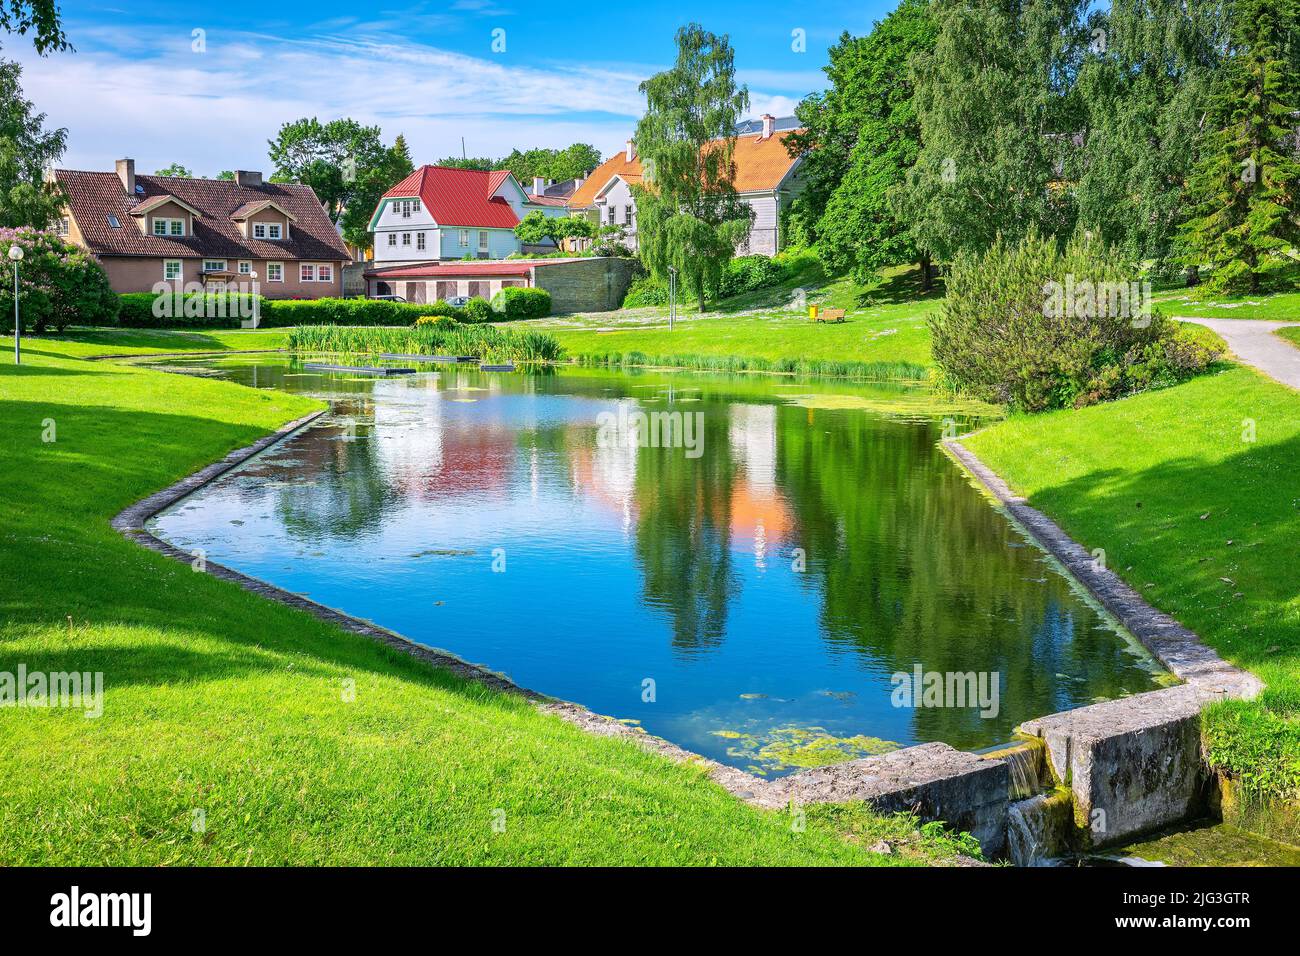 City landscape with pond and green park in Rakvere. Estonia, Baltic States Stock Photo